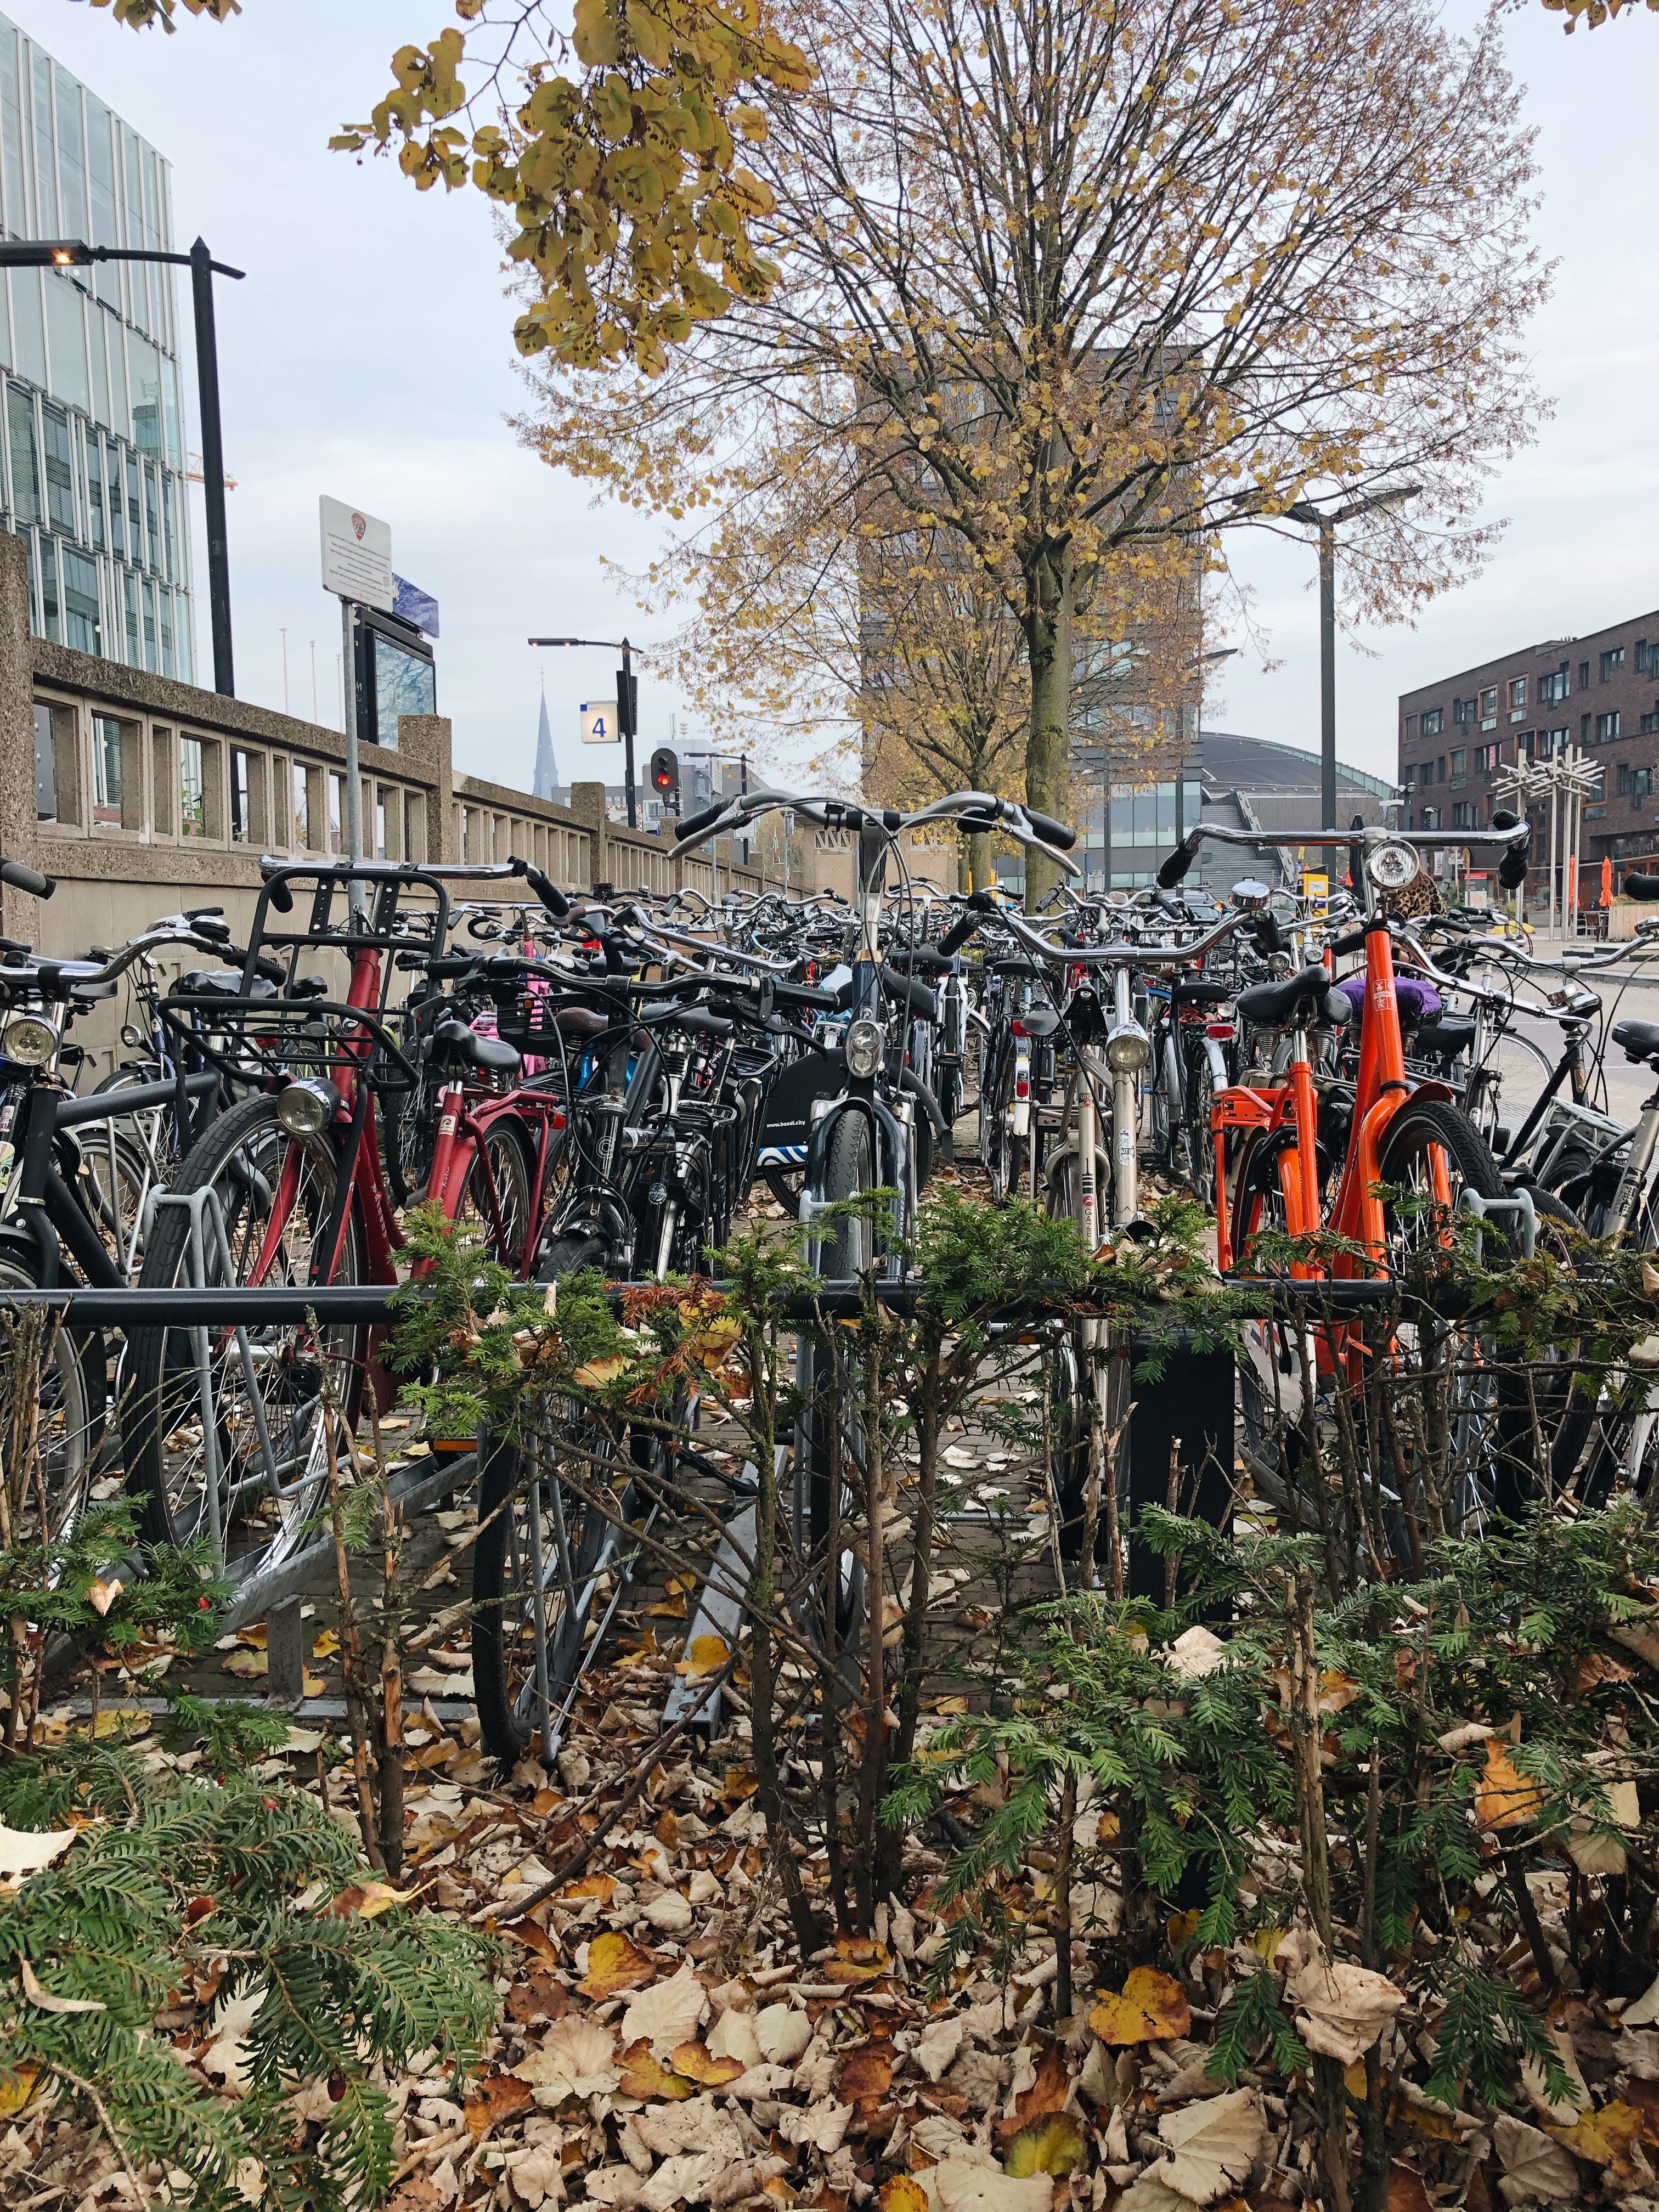 Bicycles parked by the train station in Enschede. Stanislava Pashkulova for AUBG Daily.